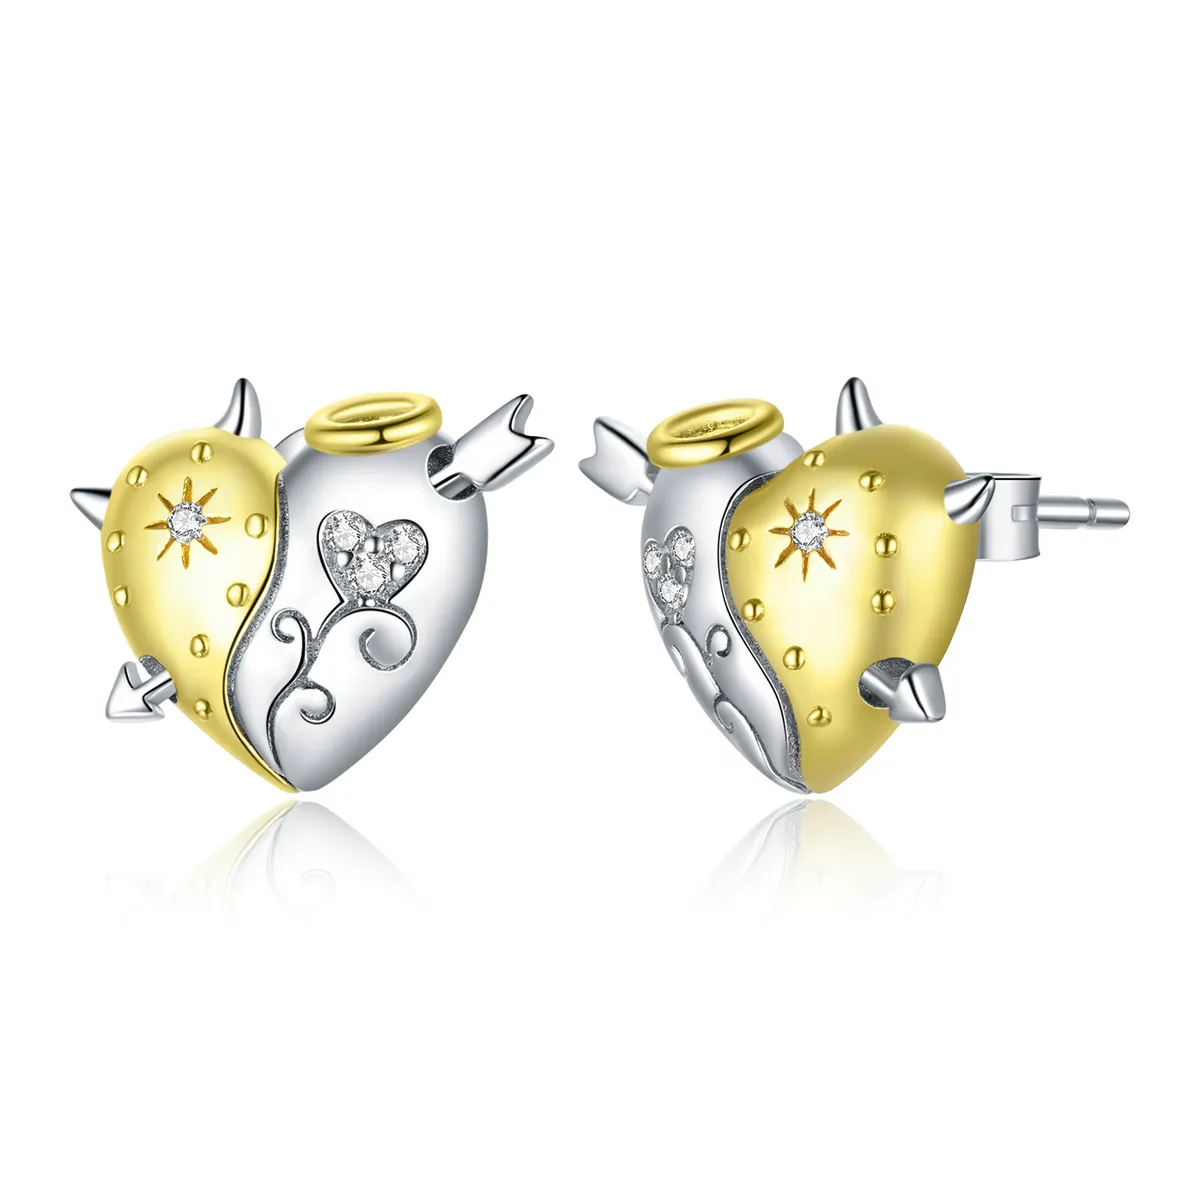 Pandora Style Silver Angels and demons Stud Earrings - SCE973